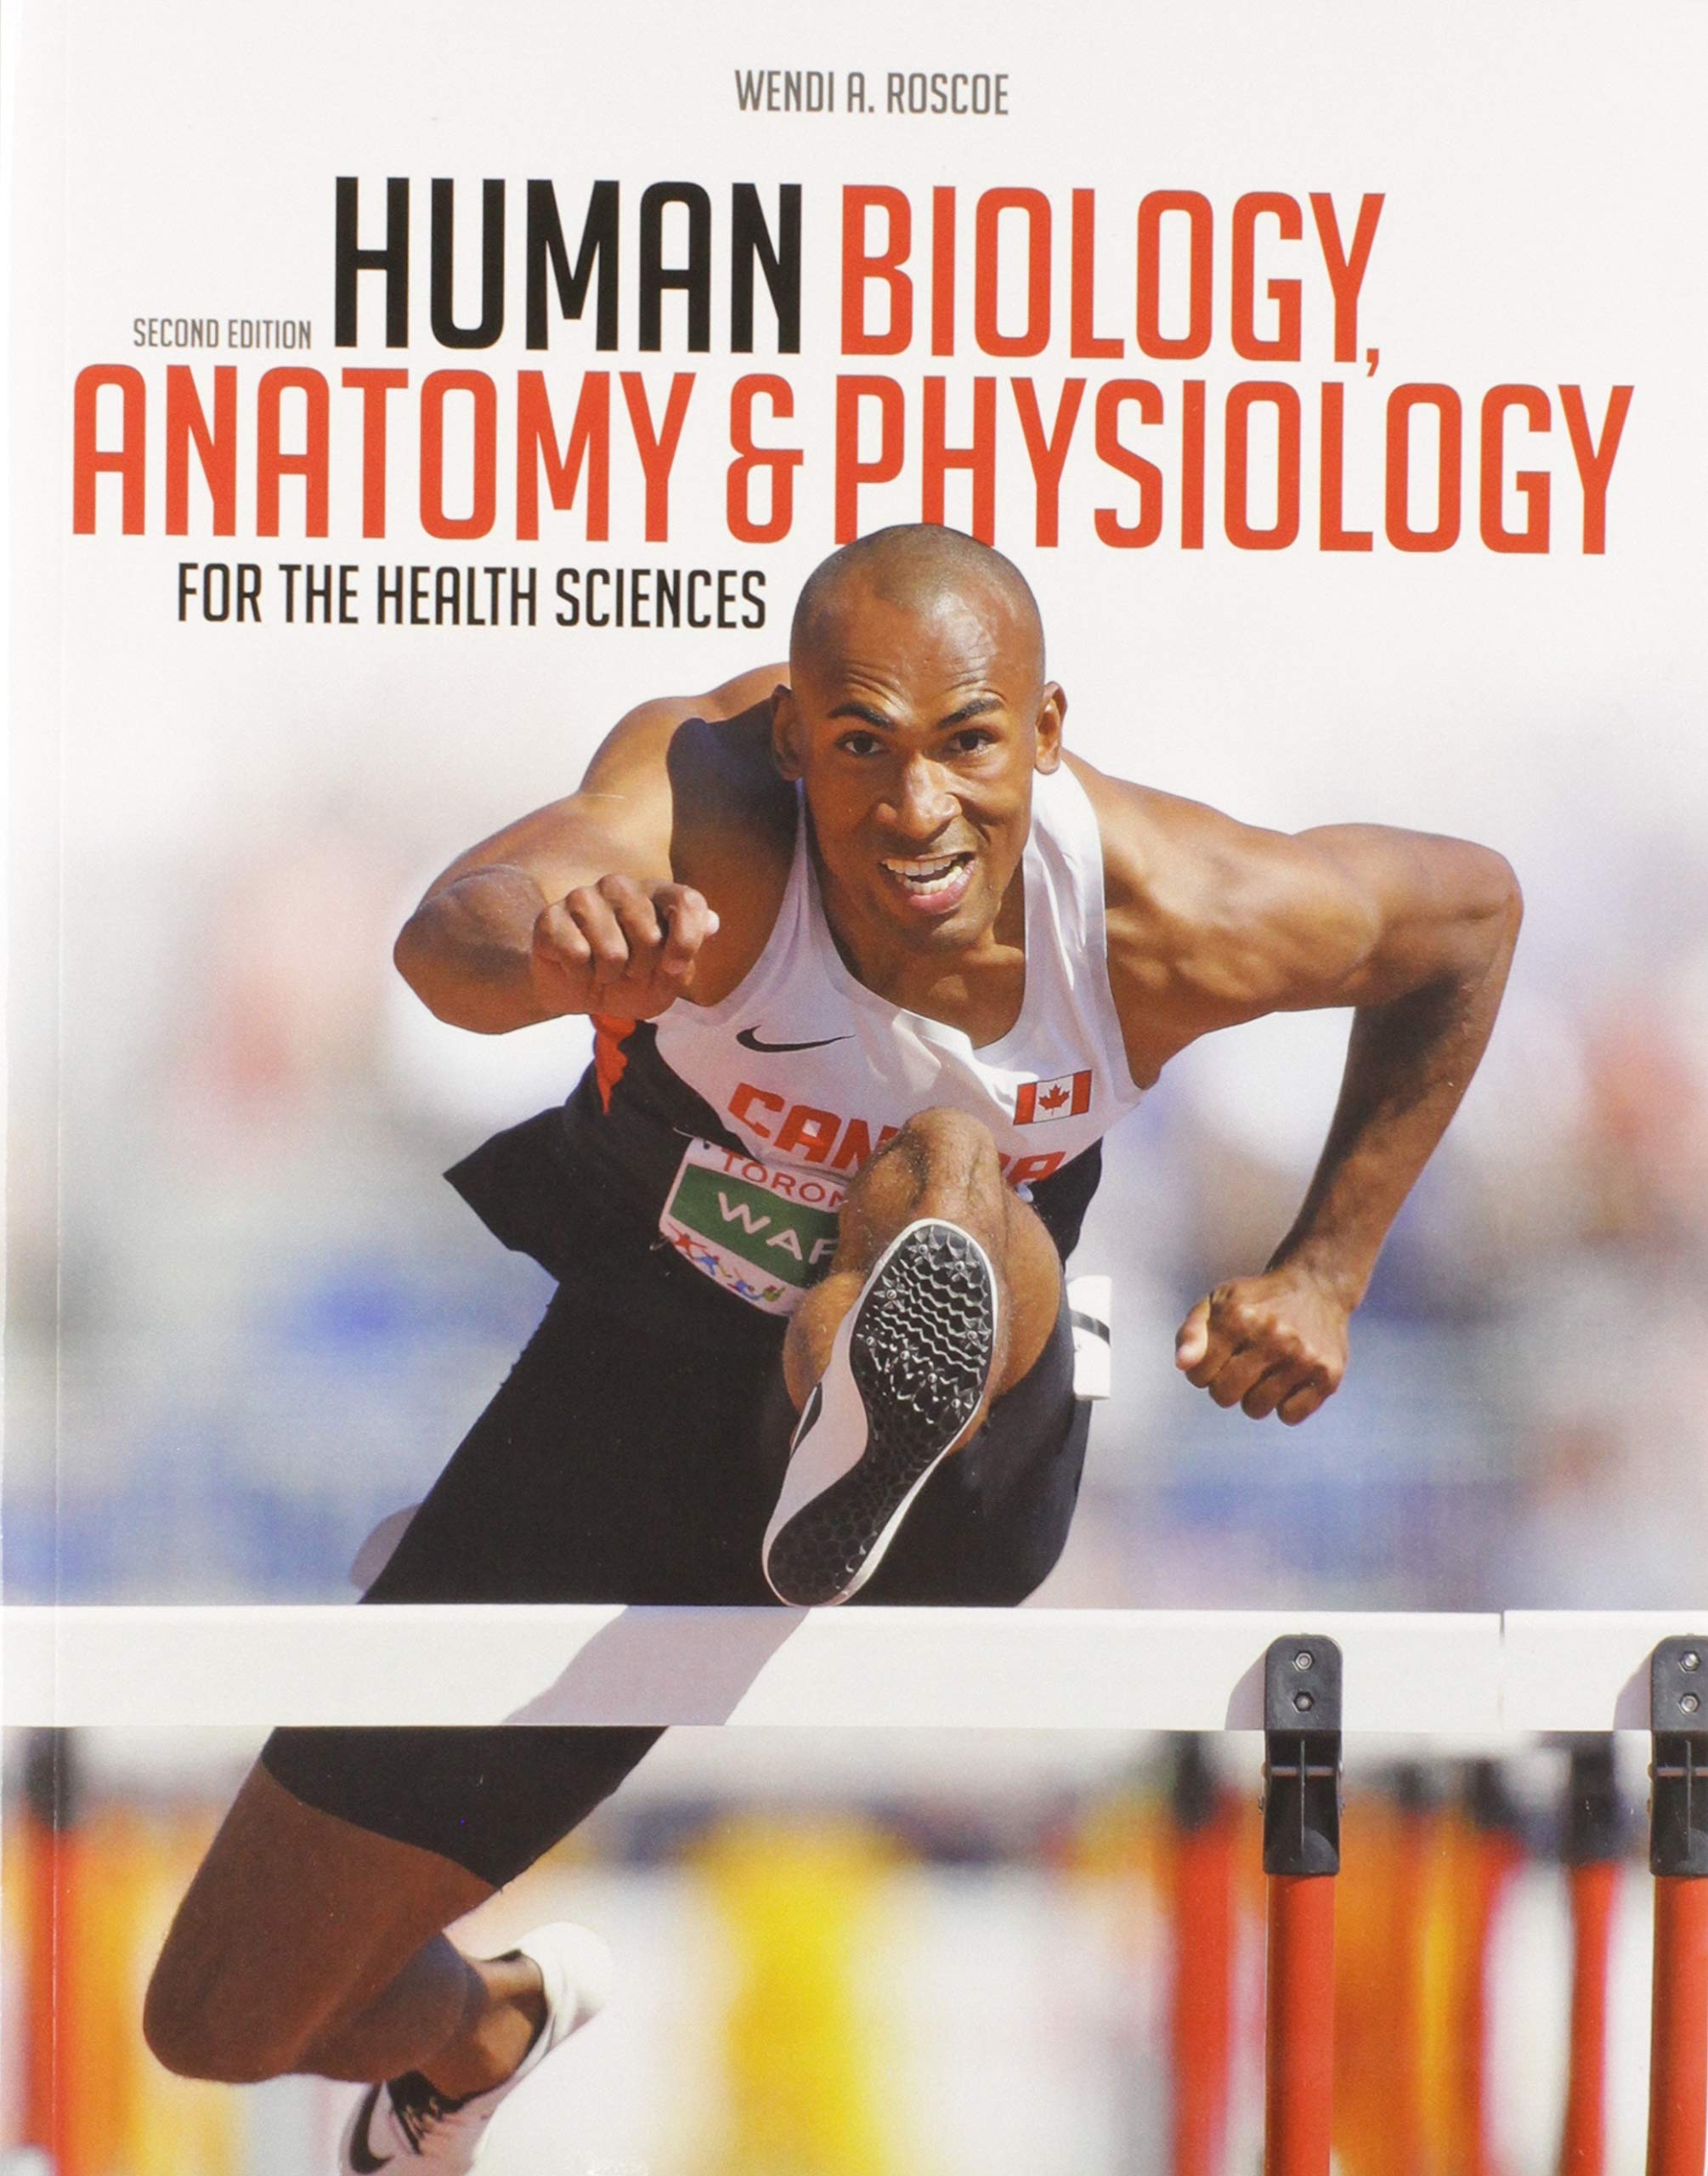 PDF Sample Human Biology, Anatomy & Physiology for the Health Sciences 2nd Edition